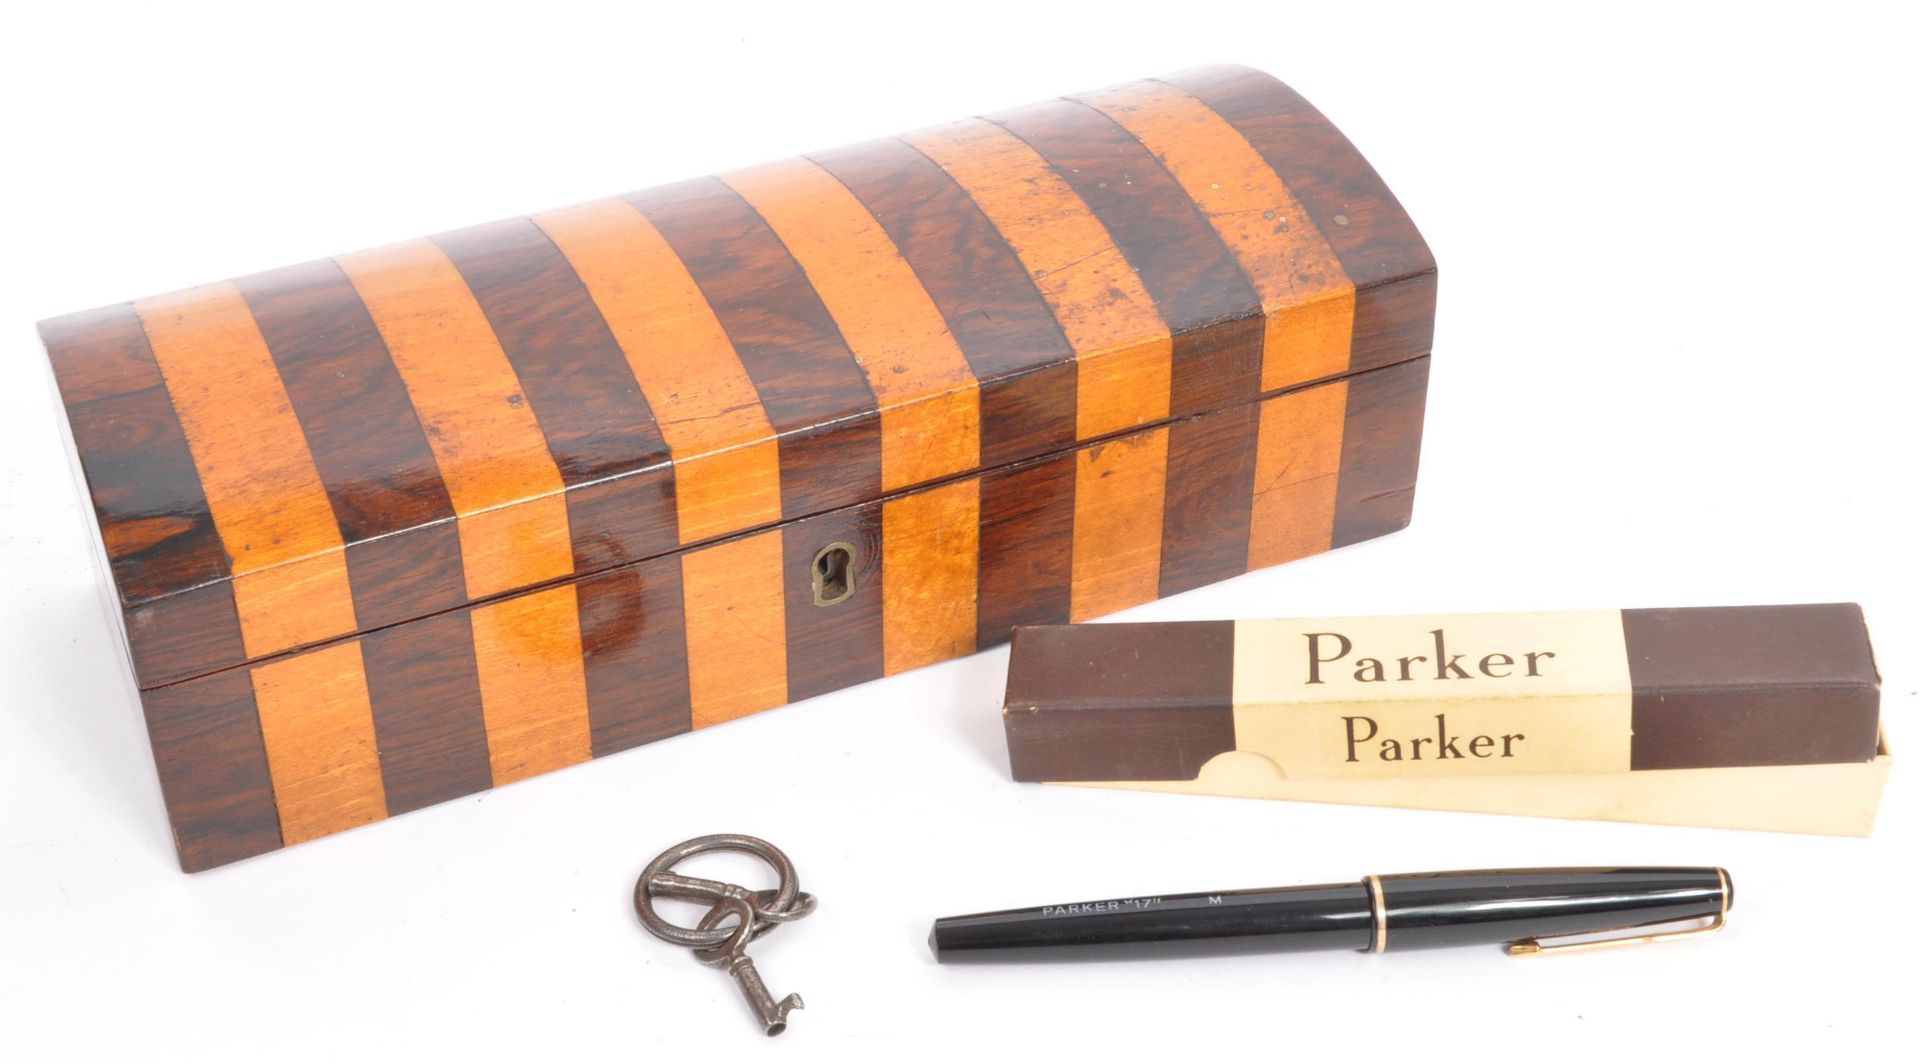 EARLY 20TH CENTURY MARQUETRY INLAID PEN BOX & PARKER PEN